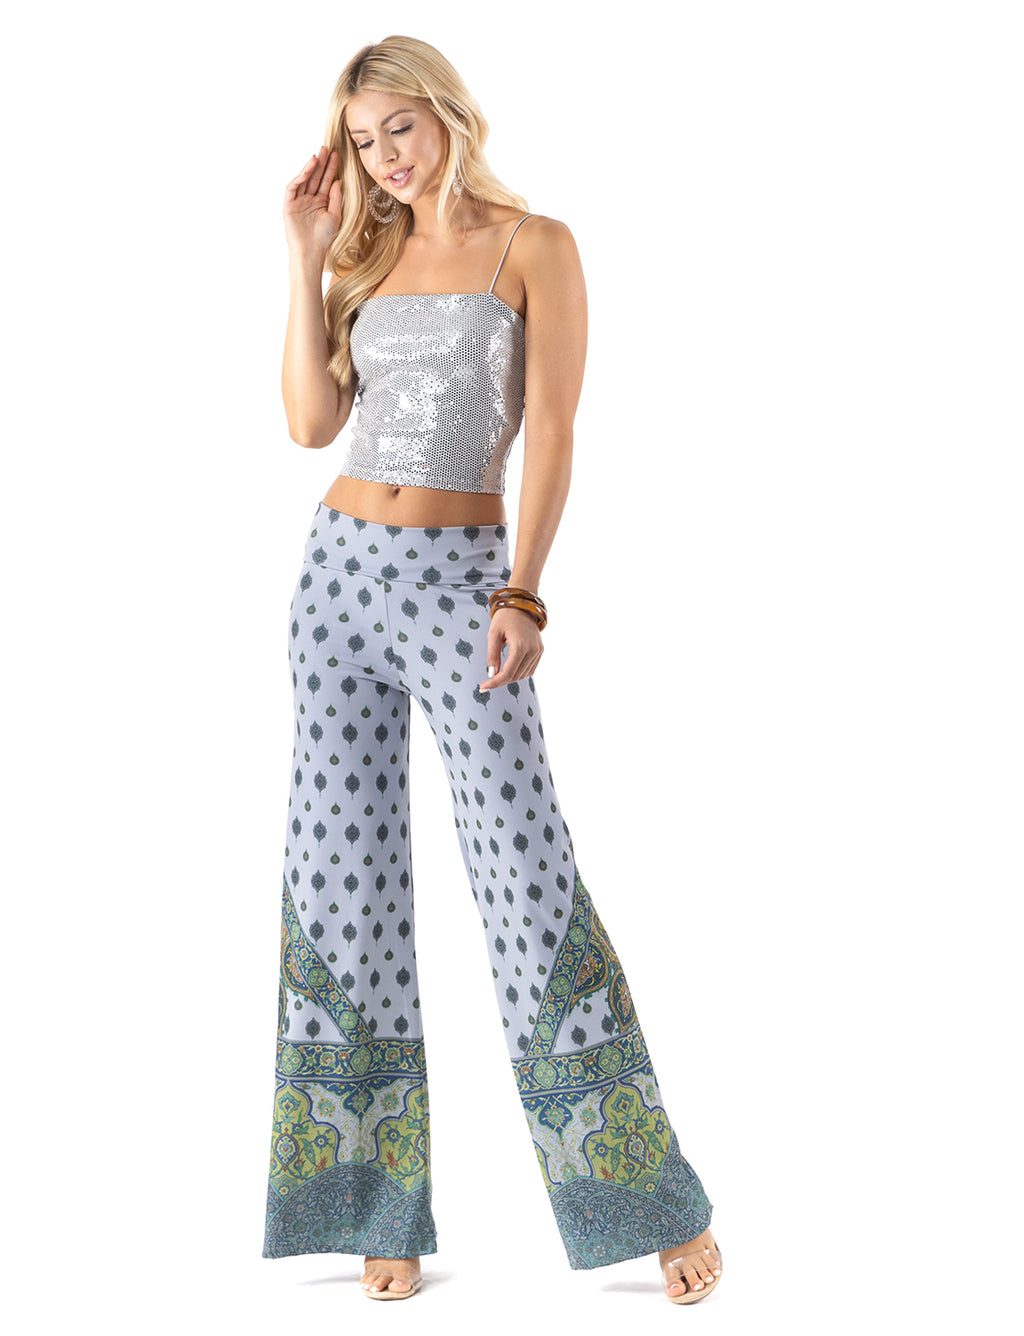 Beautiful woman wearing this amazing Blue & Green Scroll High waist palazzo pants featuring pockets, wide legs, and a comfortable stretchy fabric Perfect for any activity,relaxing day,beautiful and unique,comfortable and flattering